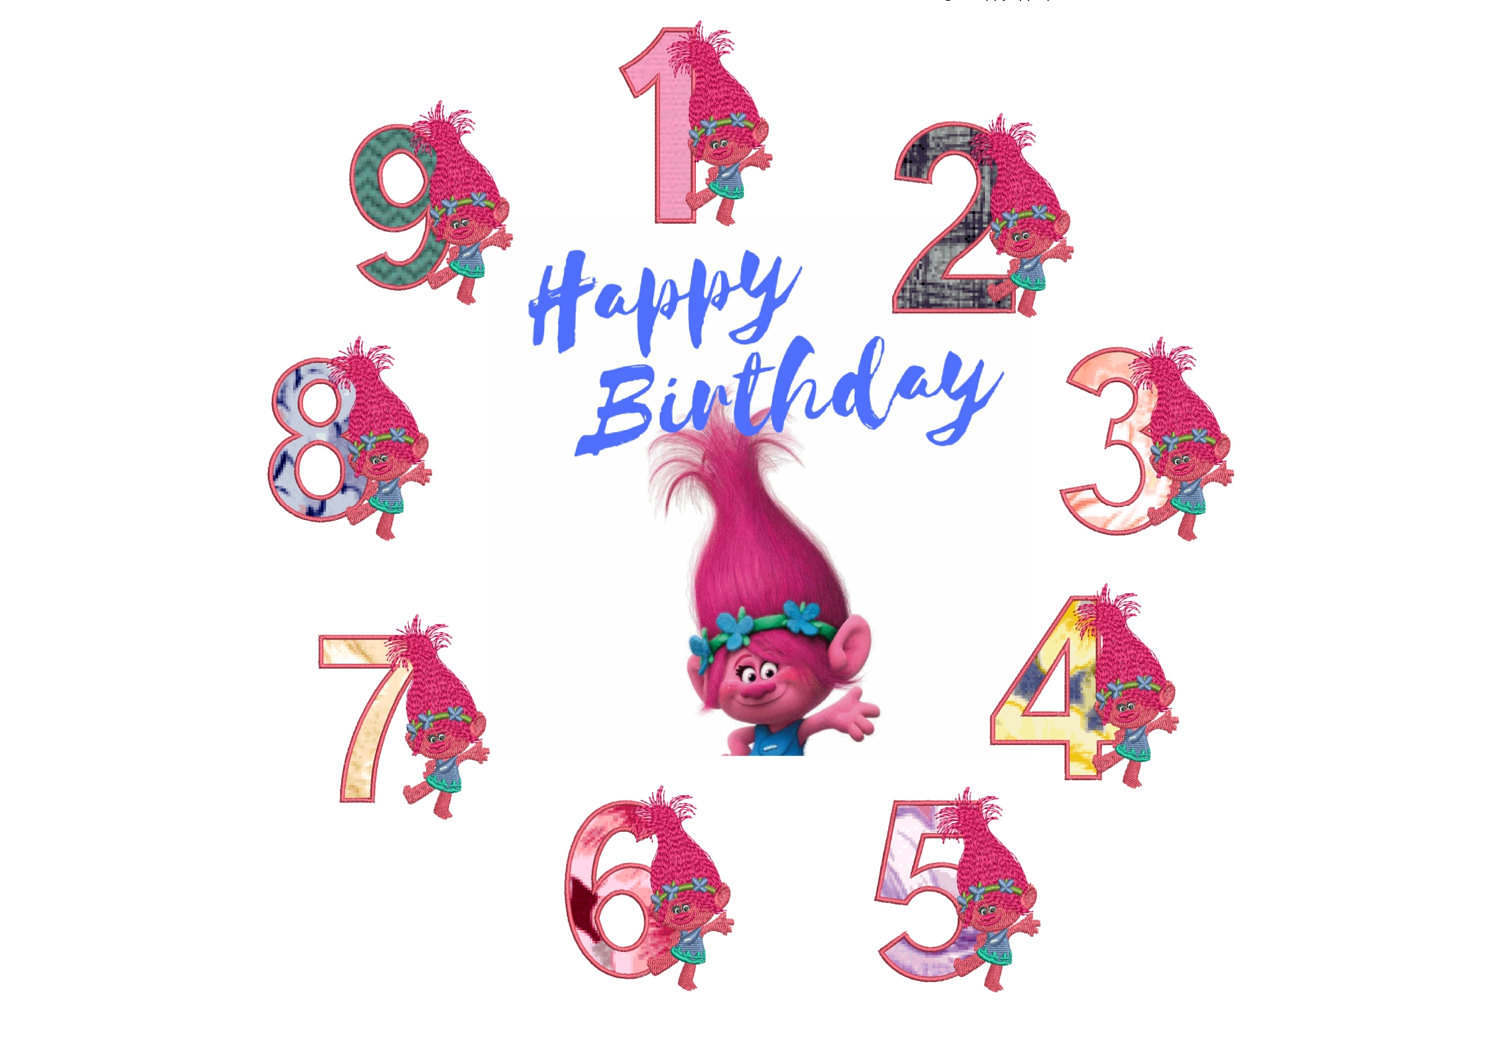 75% off on 4x4in hoop - Princess Poppy from the Movie Trolls - machine embroidery design - Applique Numbers 1 to 9 excellent for birthdays.